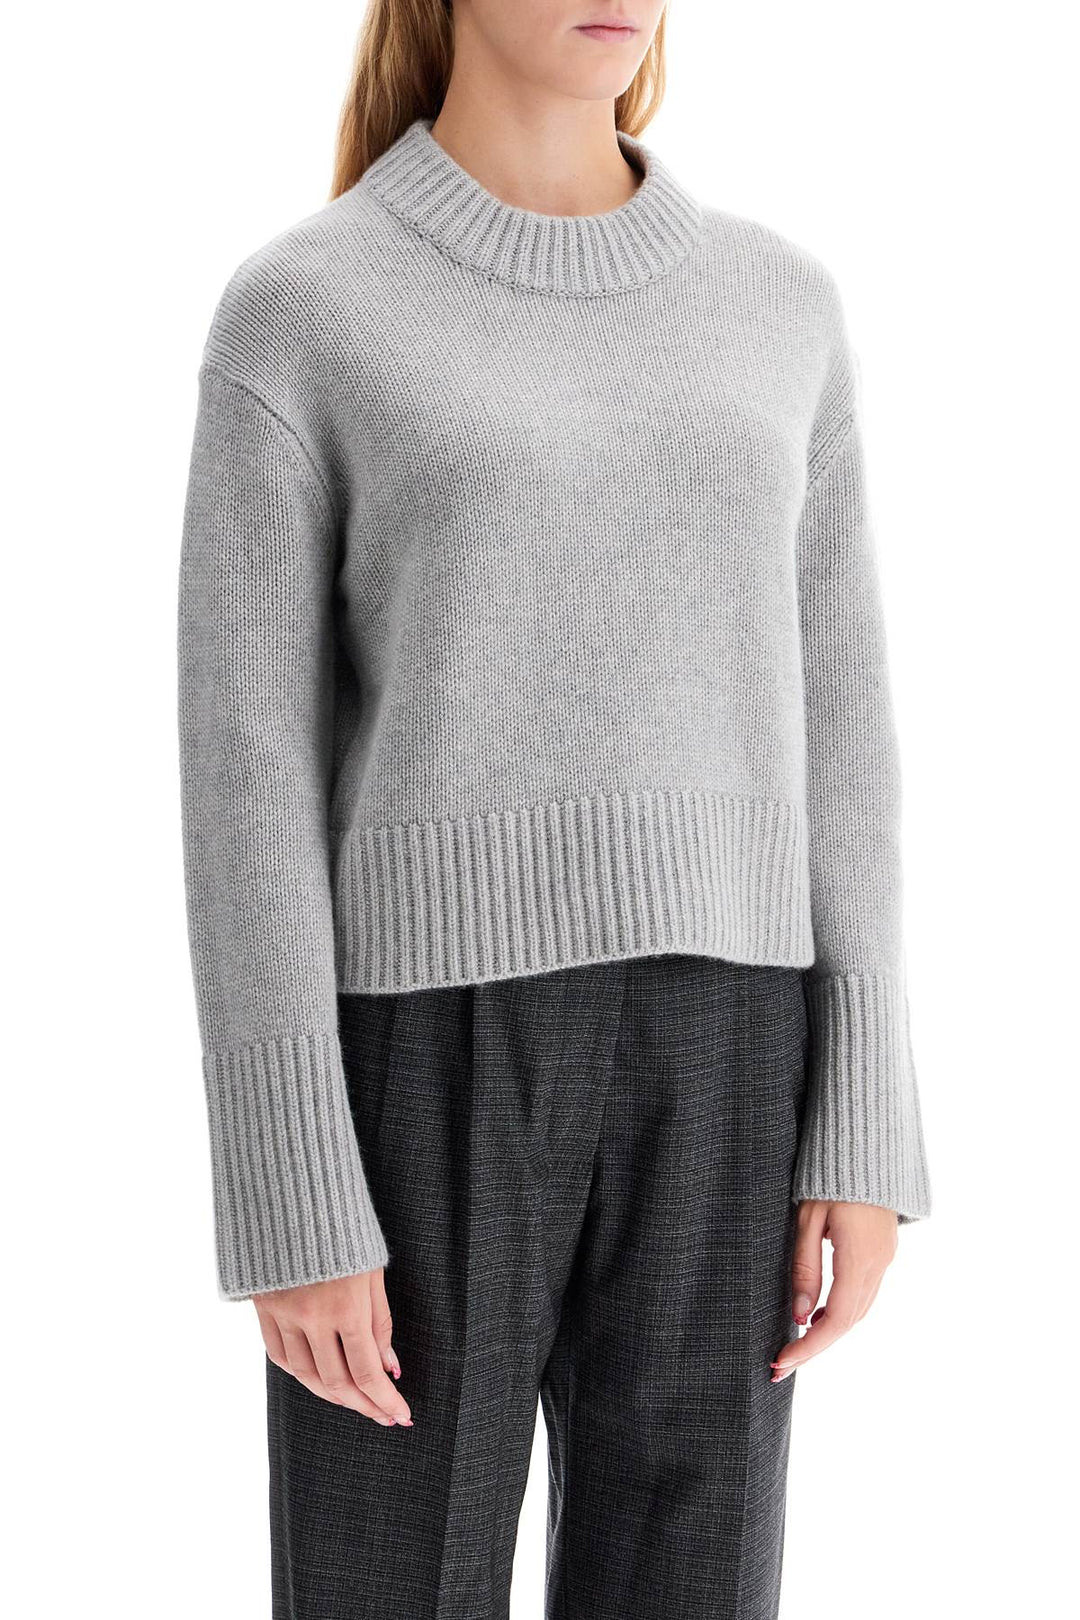 Lisa Yang Cashmere Sony Pullover Sweater   Grey